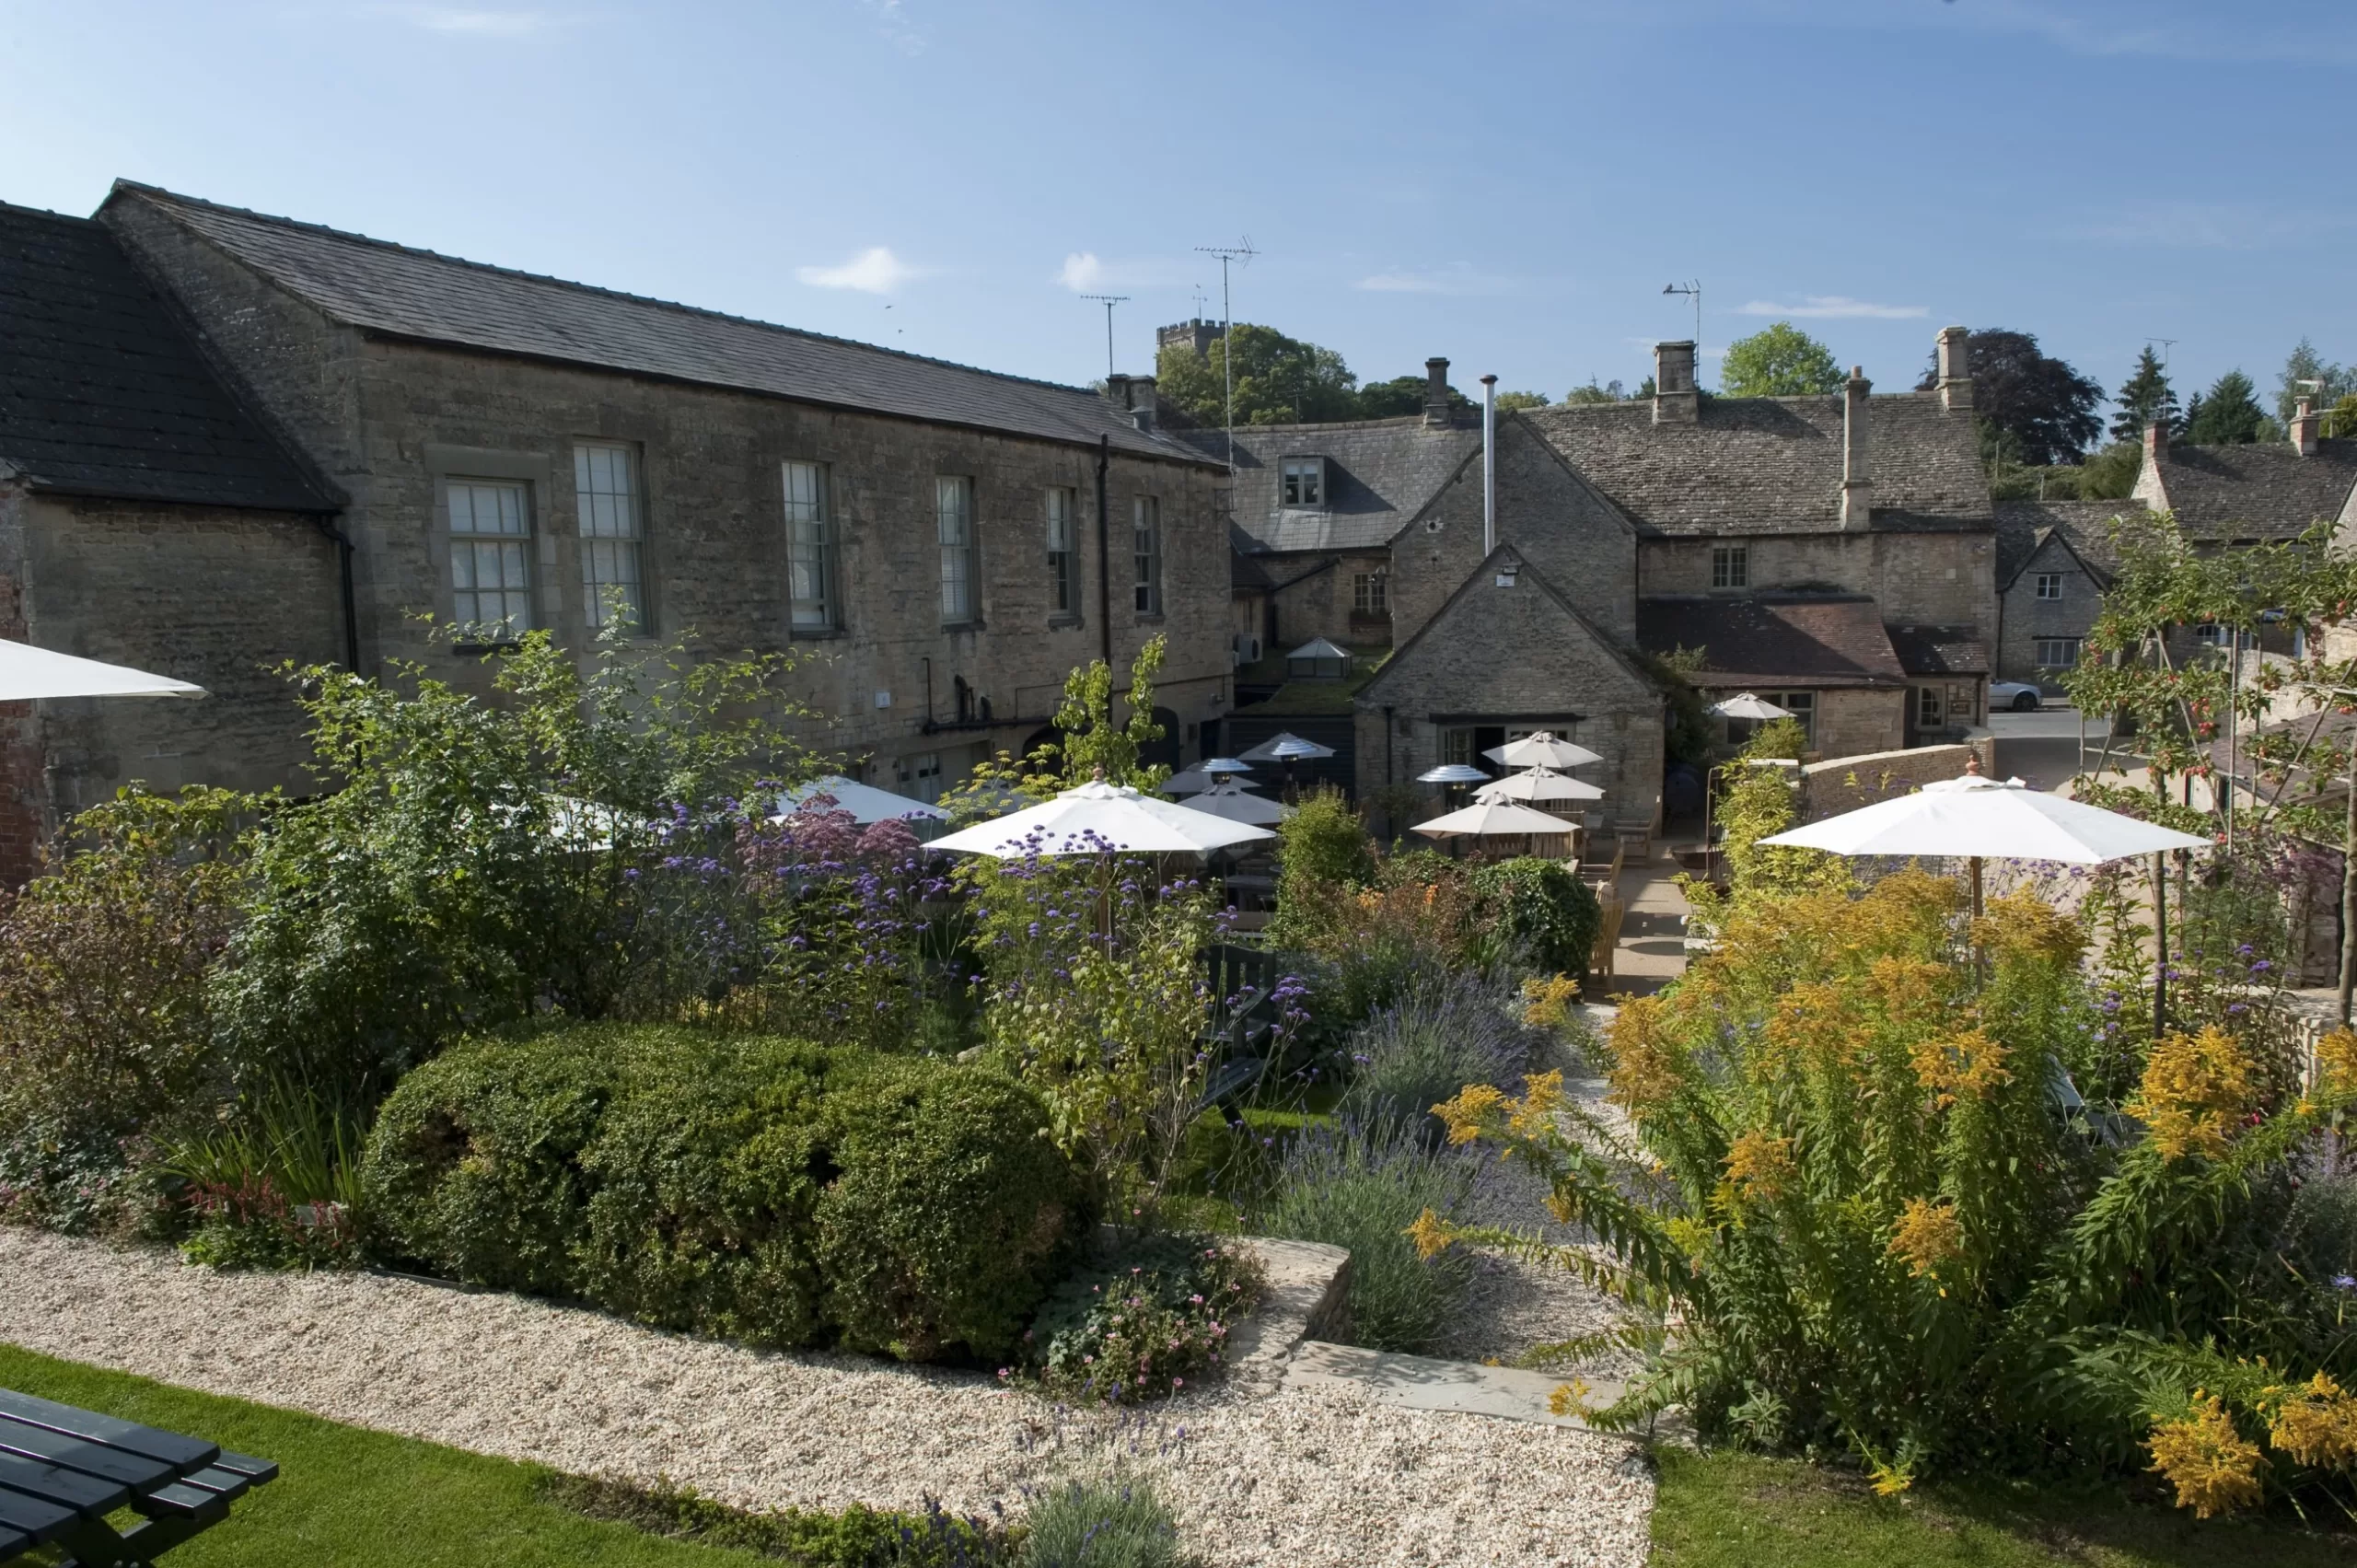 The Best Beer Gardens in the Cotswolds This Summer